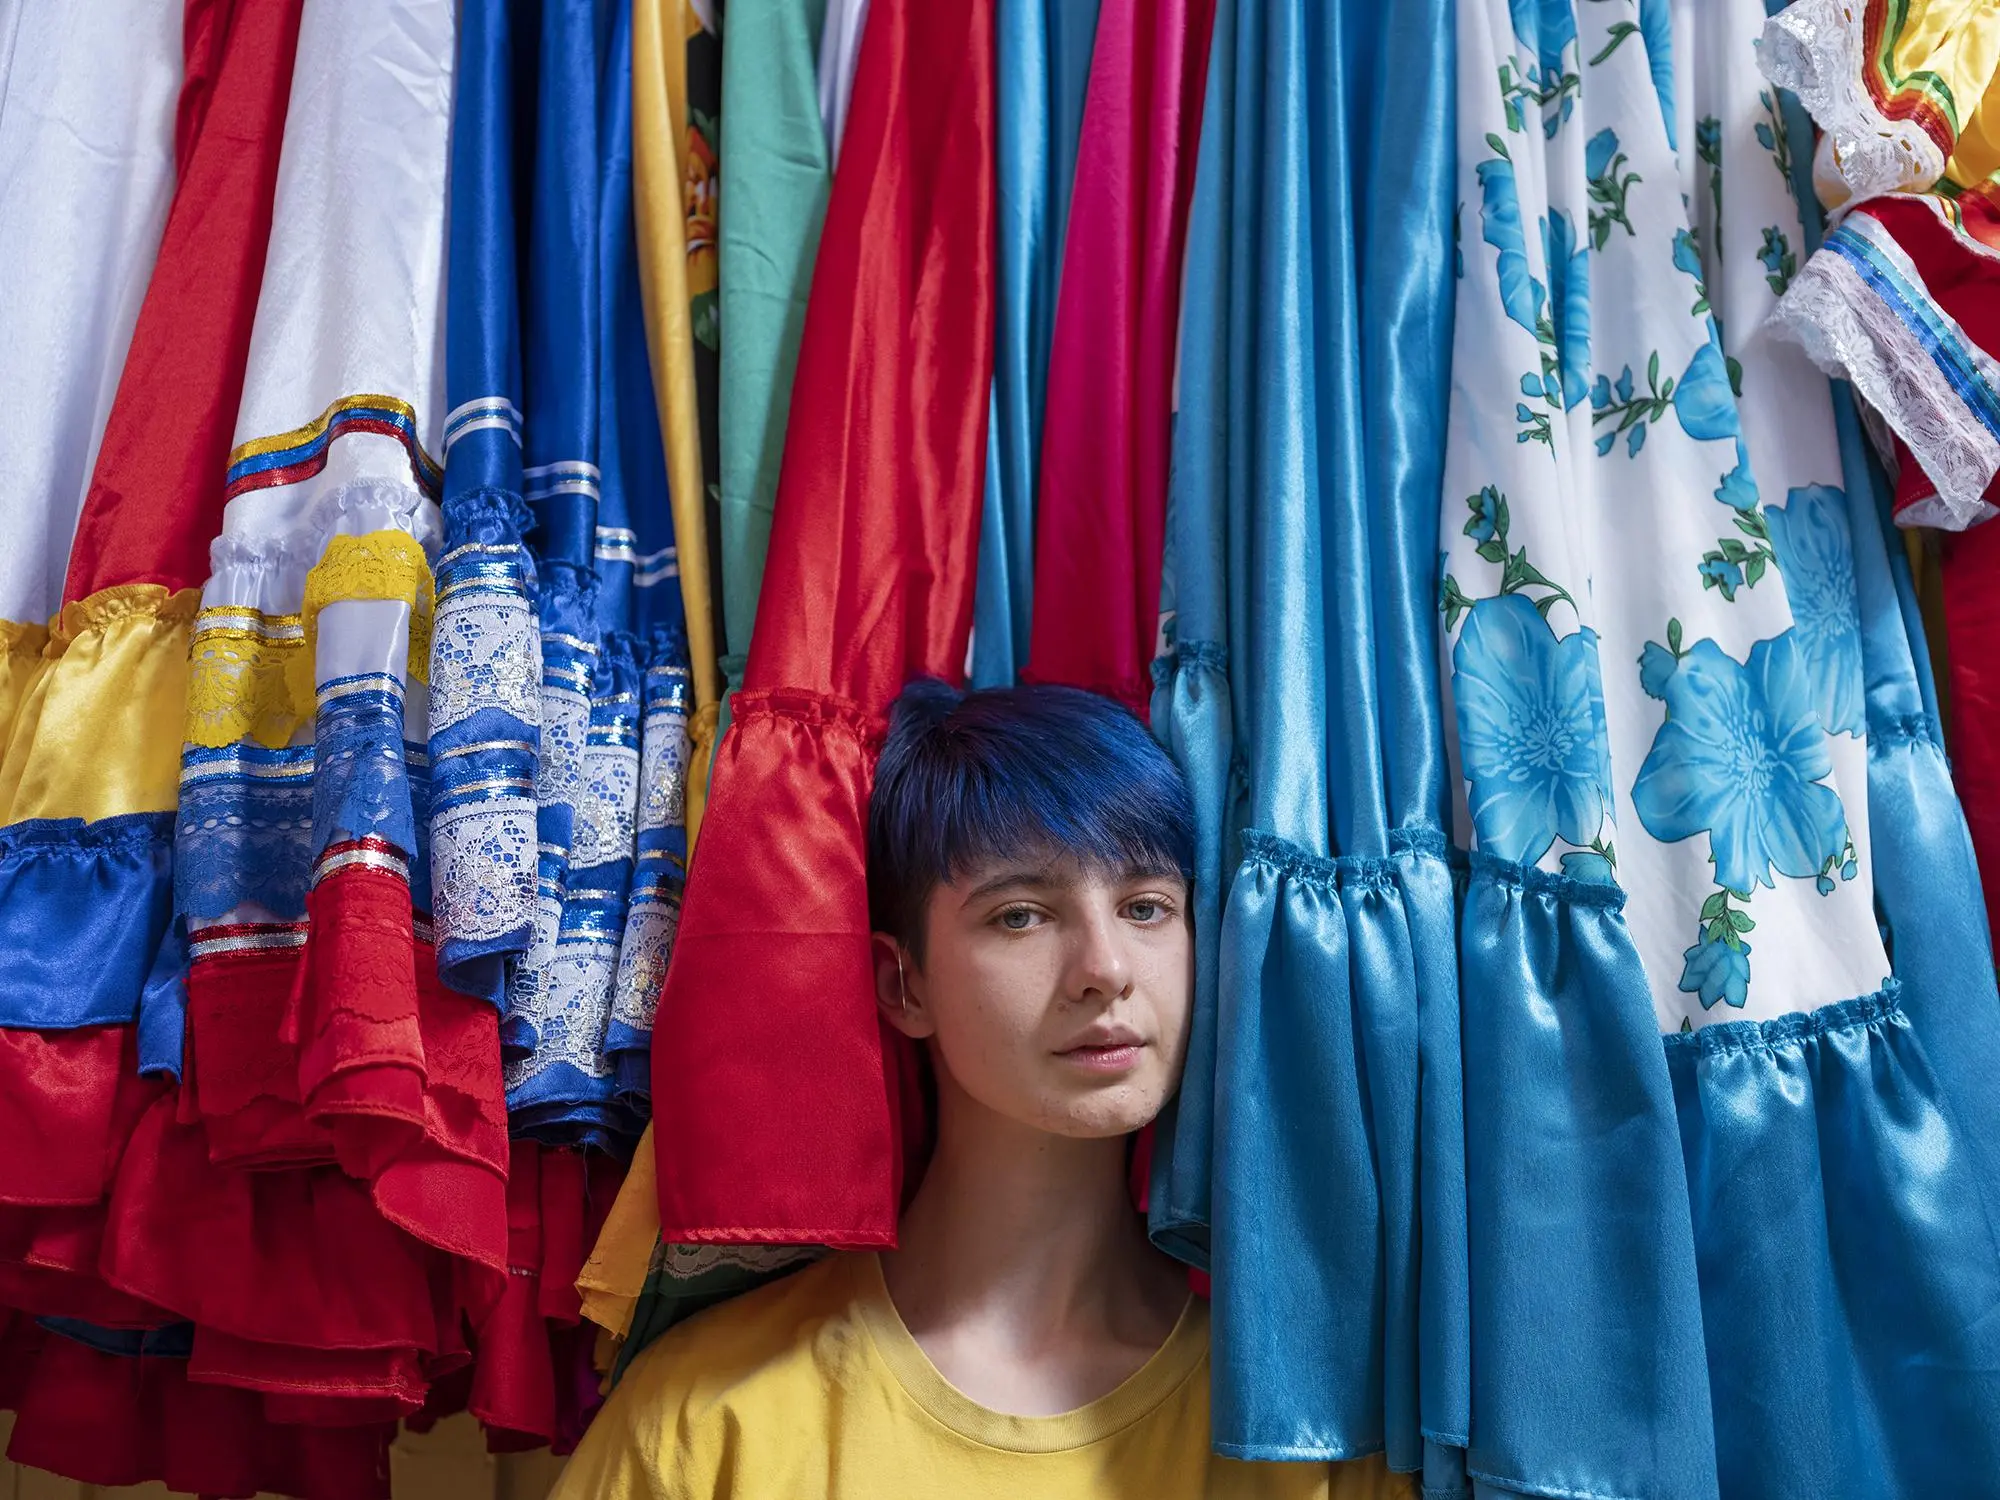 A nonbinary person with blue hair poses between traditional dresses on a rack.